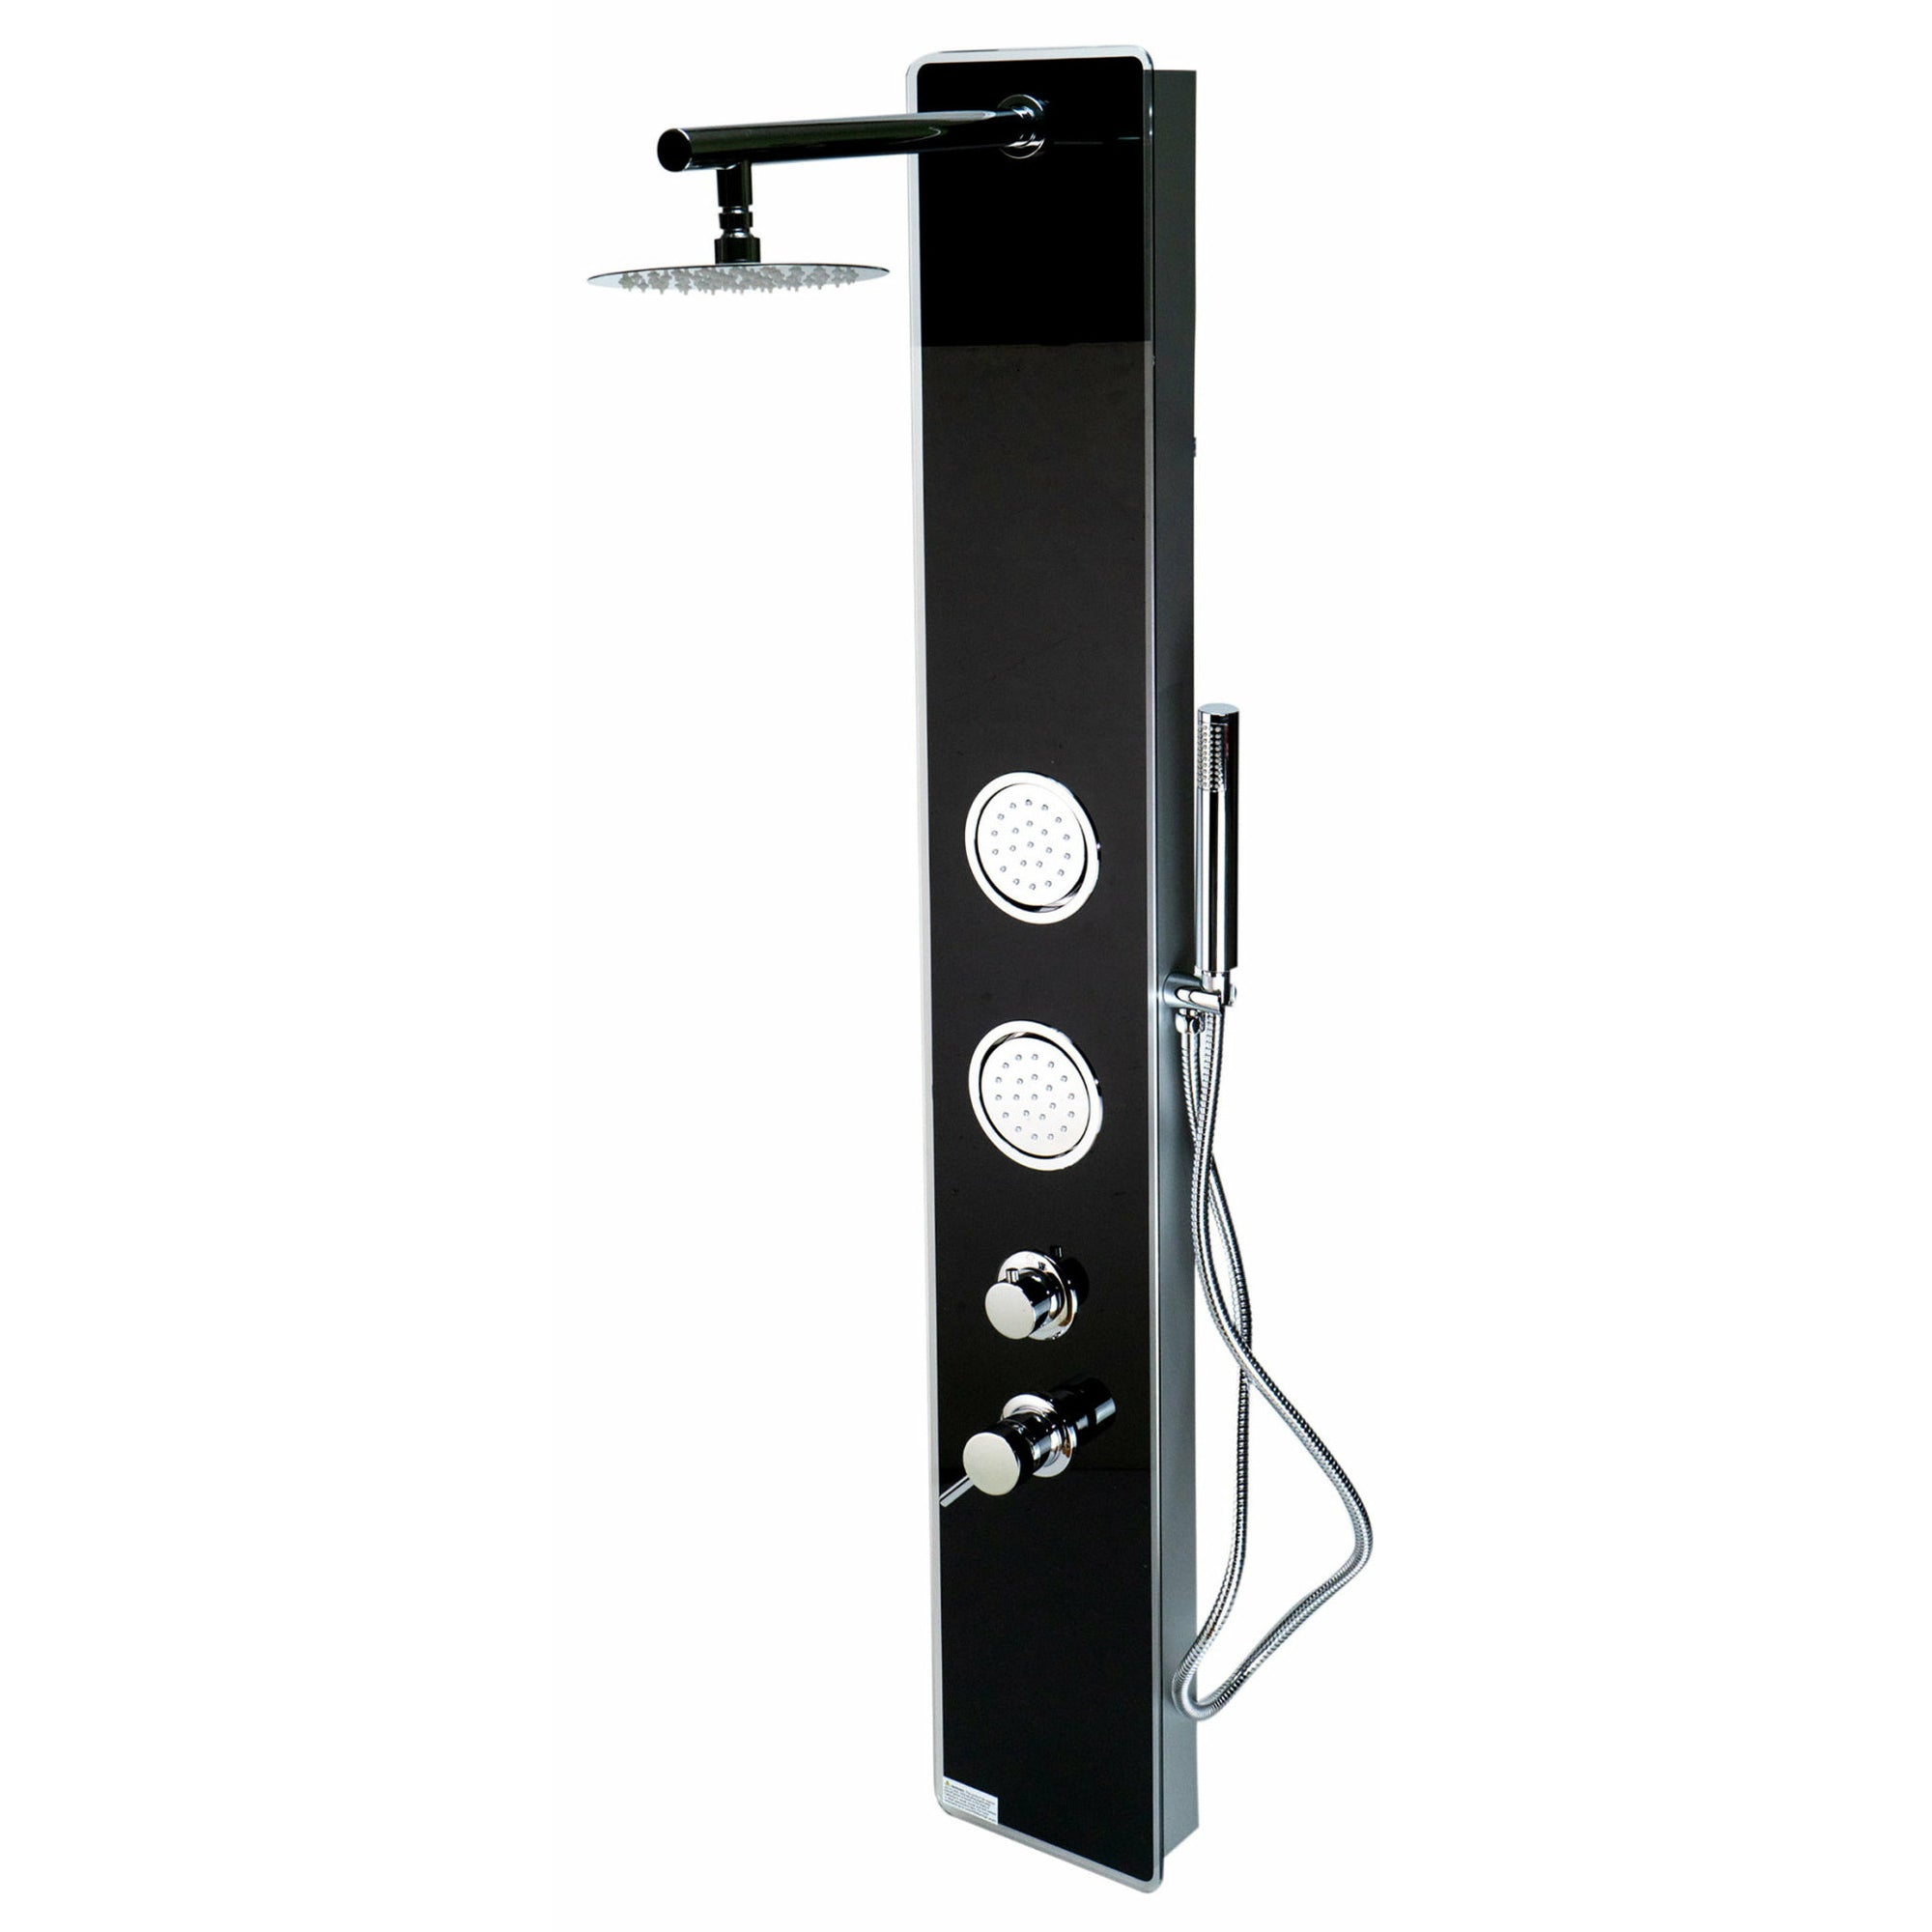 ALFI ABSP55B Black Glass Shower Panel with 2 Body Spray, overhead Rain Shower Head, Flexible reinforced stainless steel hot & cold water supply hose, Sleek Stainless Steel panel with Polished Chrome handles & knob and Handheld sprayer in a white background